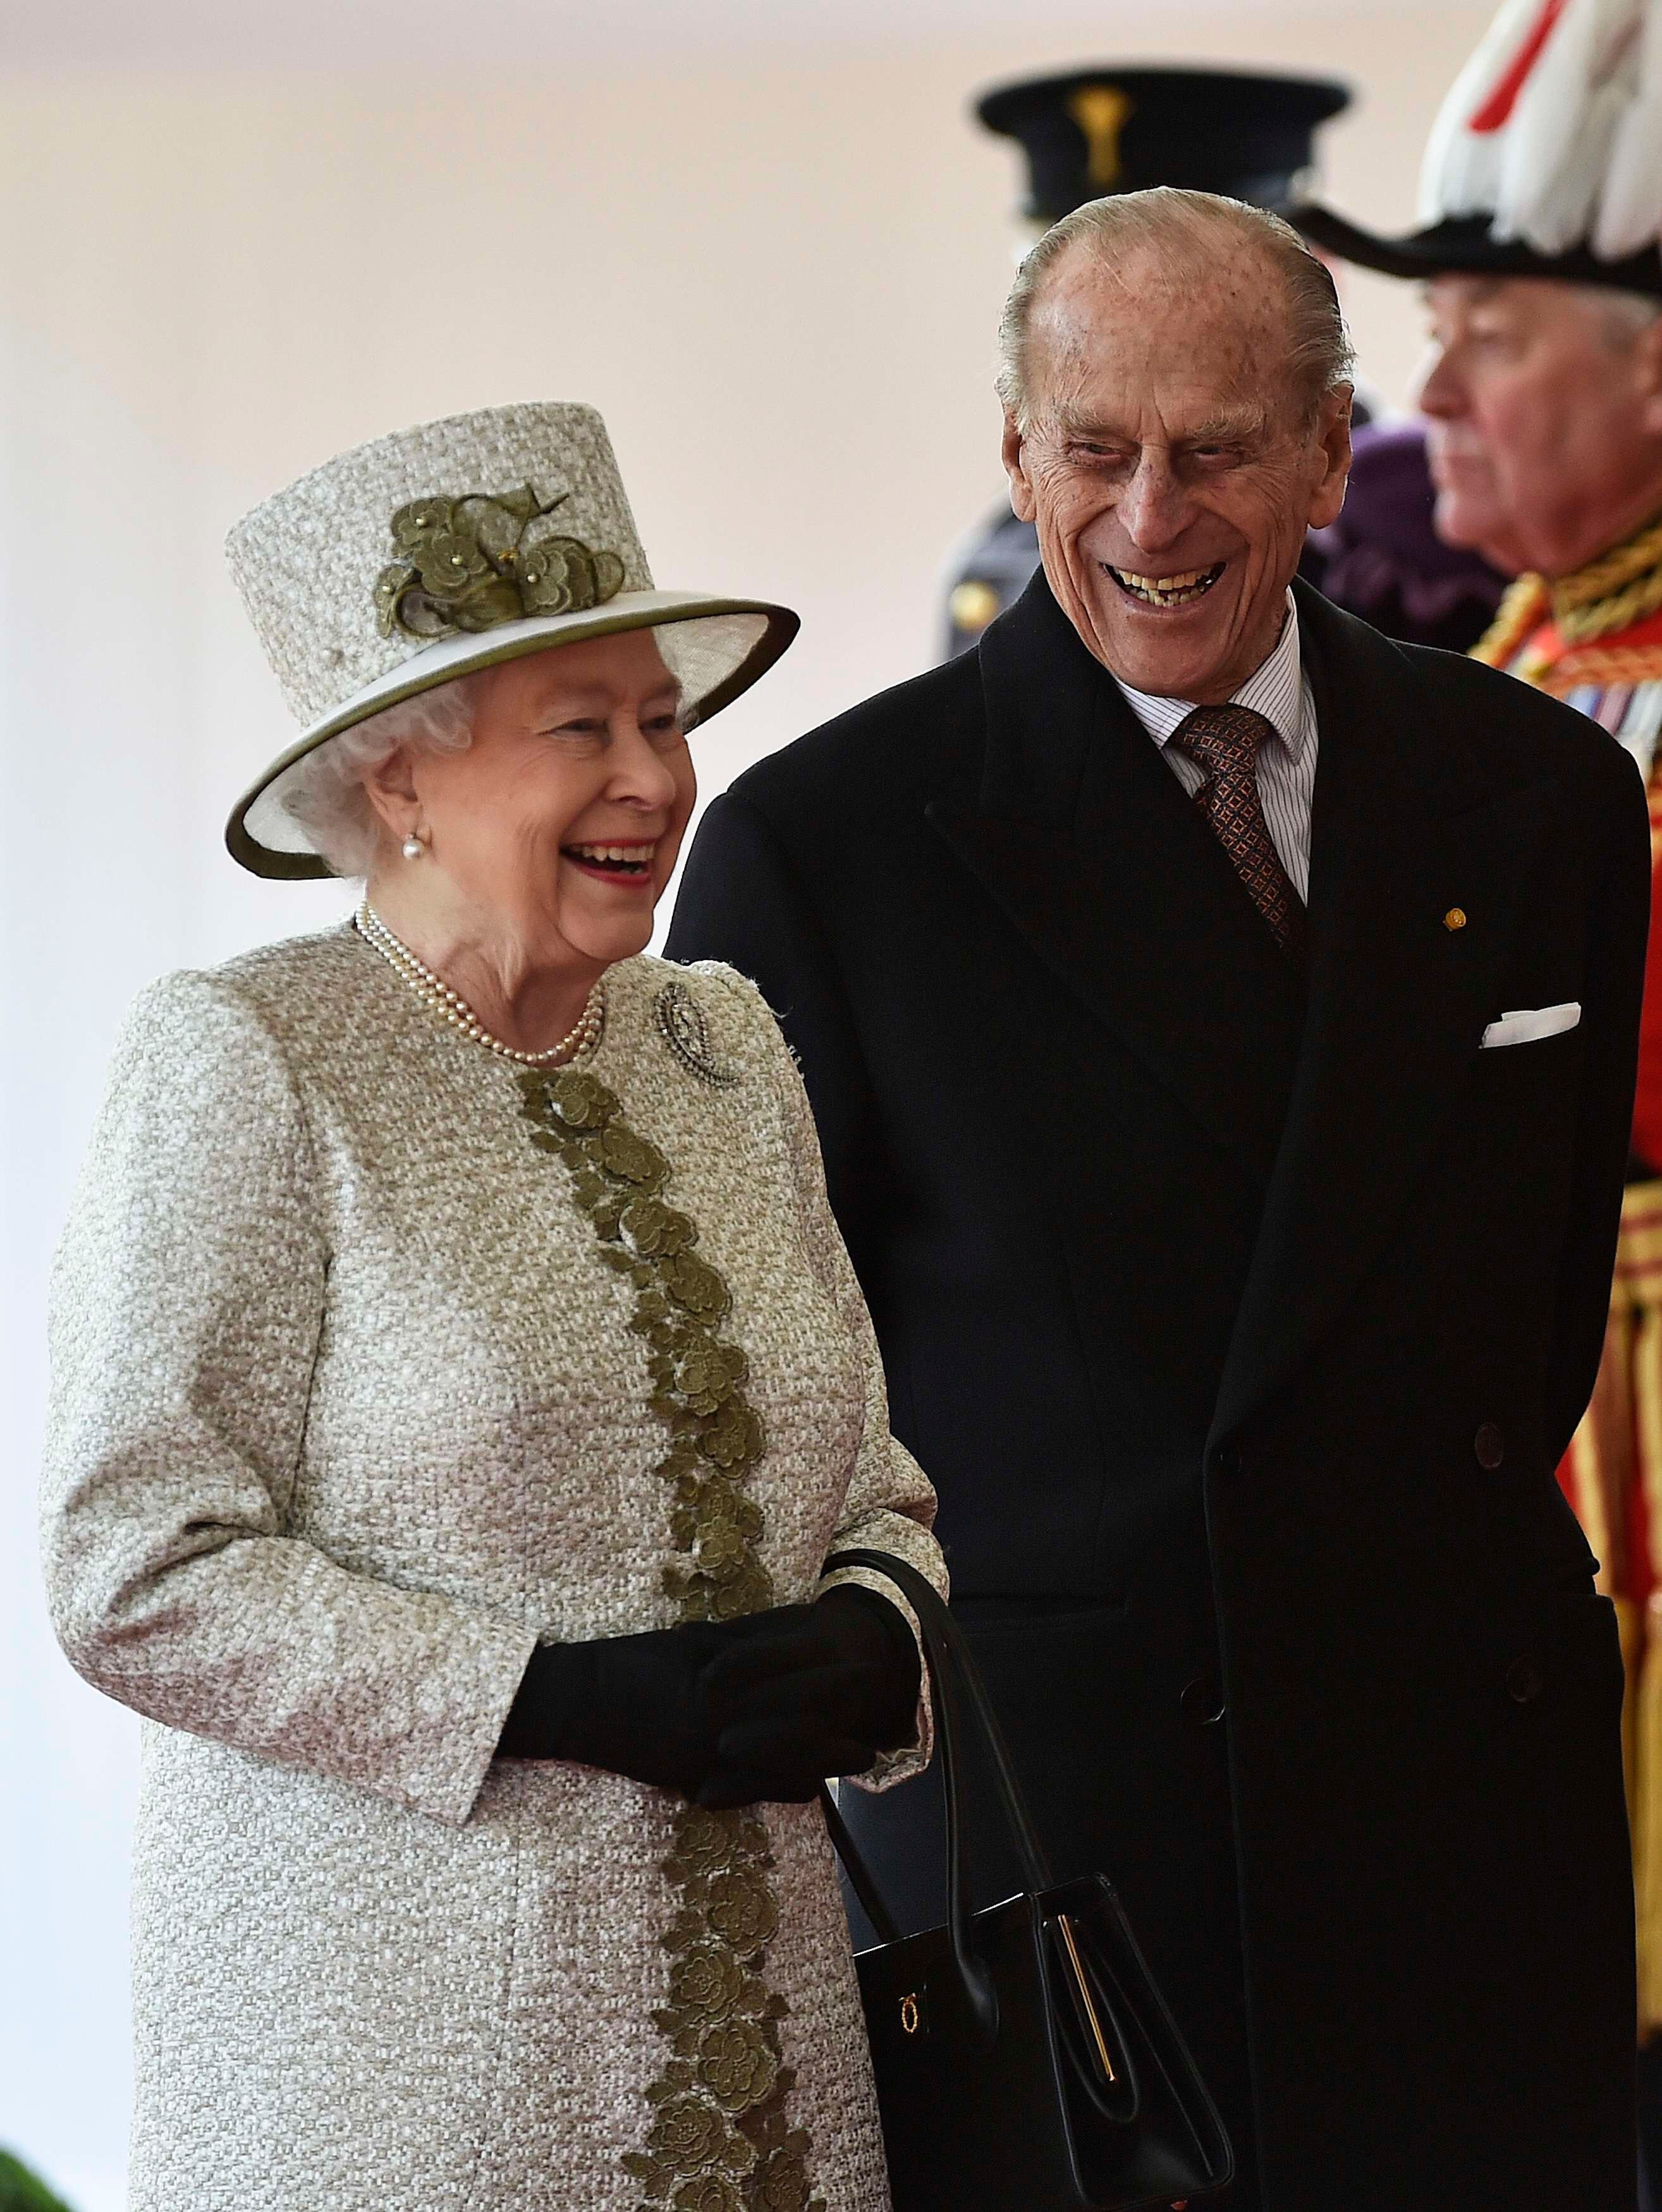 Queen Elizabeth II and Prince Philip, Duke of Edinburgh laugh during a ceremonial welcome for the State Visit of The President of The United Mexican, Senor Enrique Pena Nieto and Senora Rivera at Horse Guards Parade. | Source: Getty Images